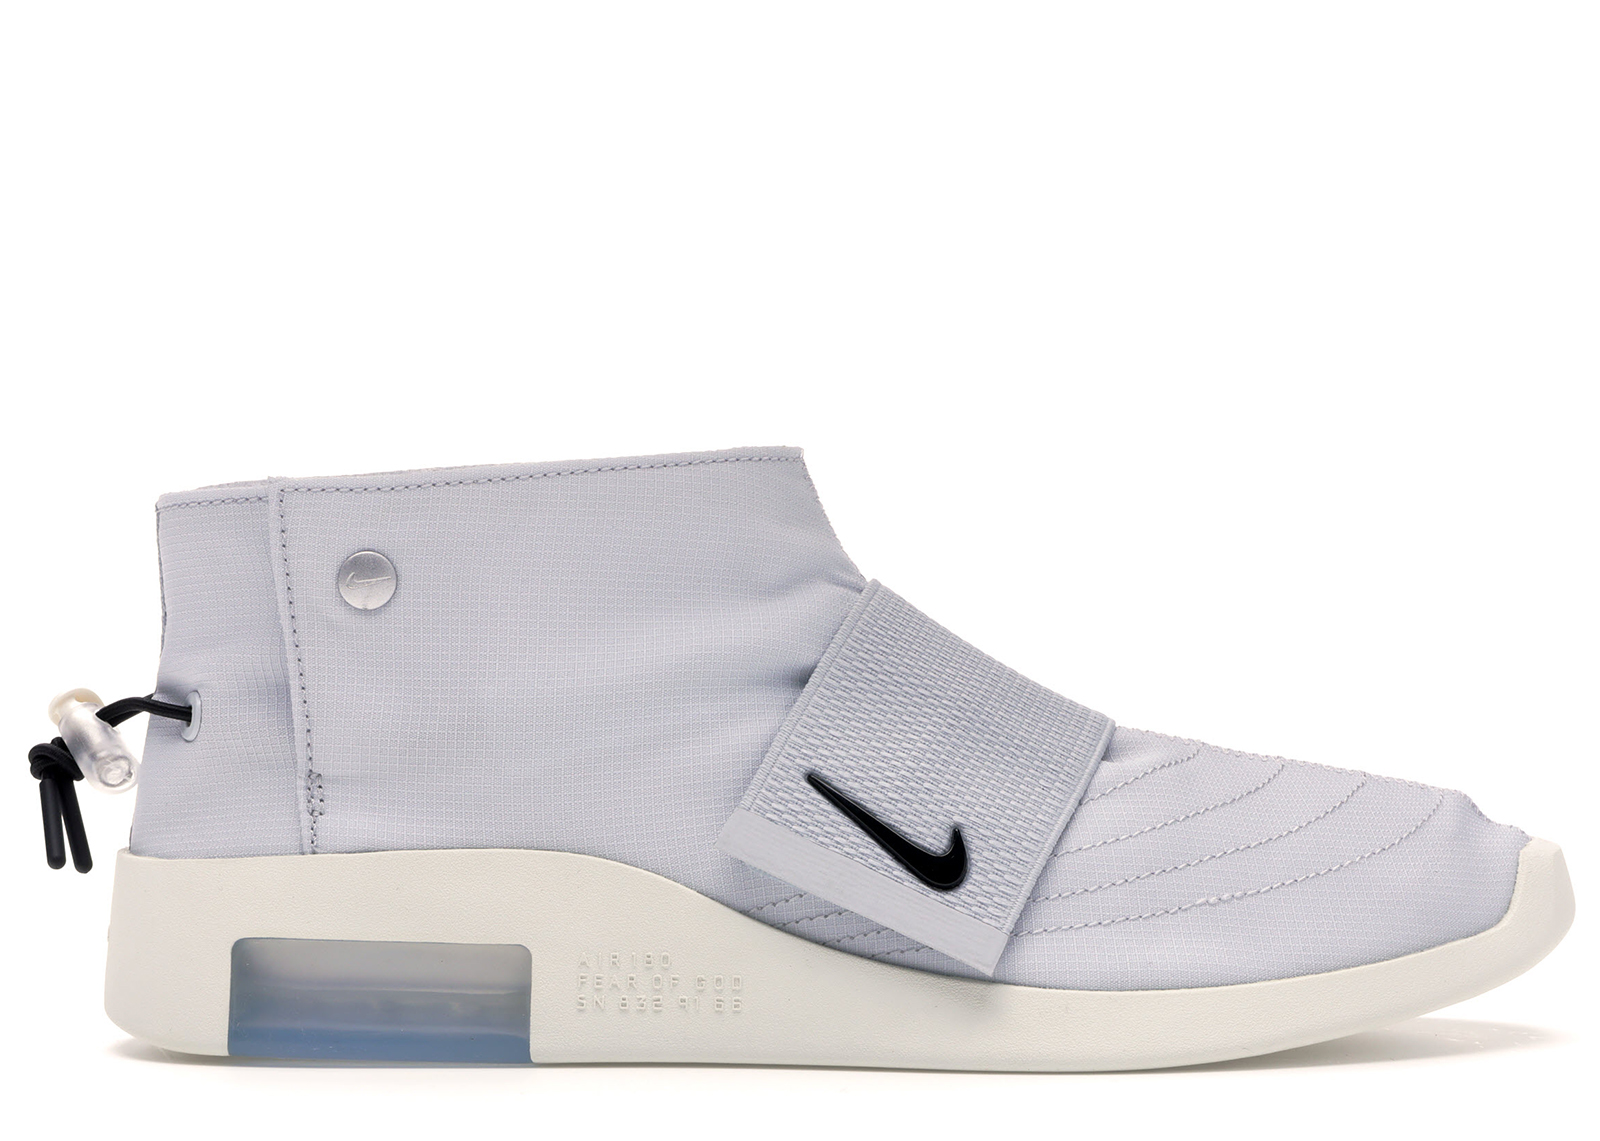 Nike Air Fear Of God Moccasin Pure Platinum Men's - AT8086-001